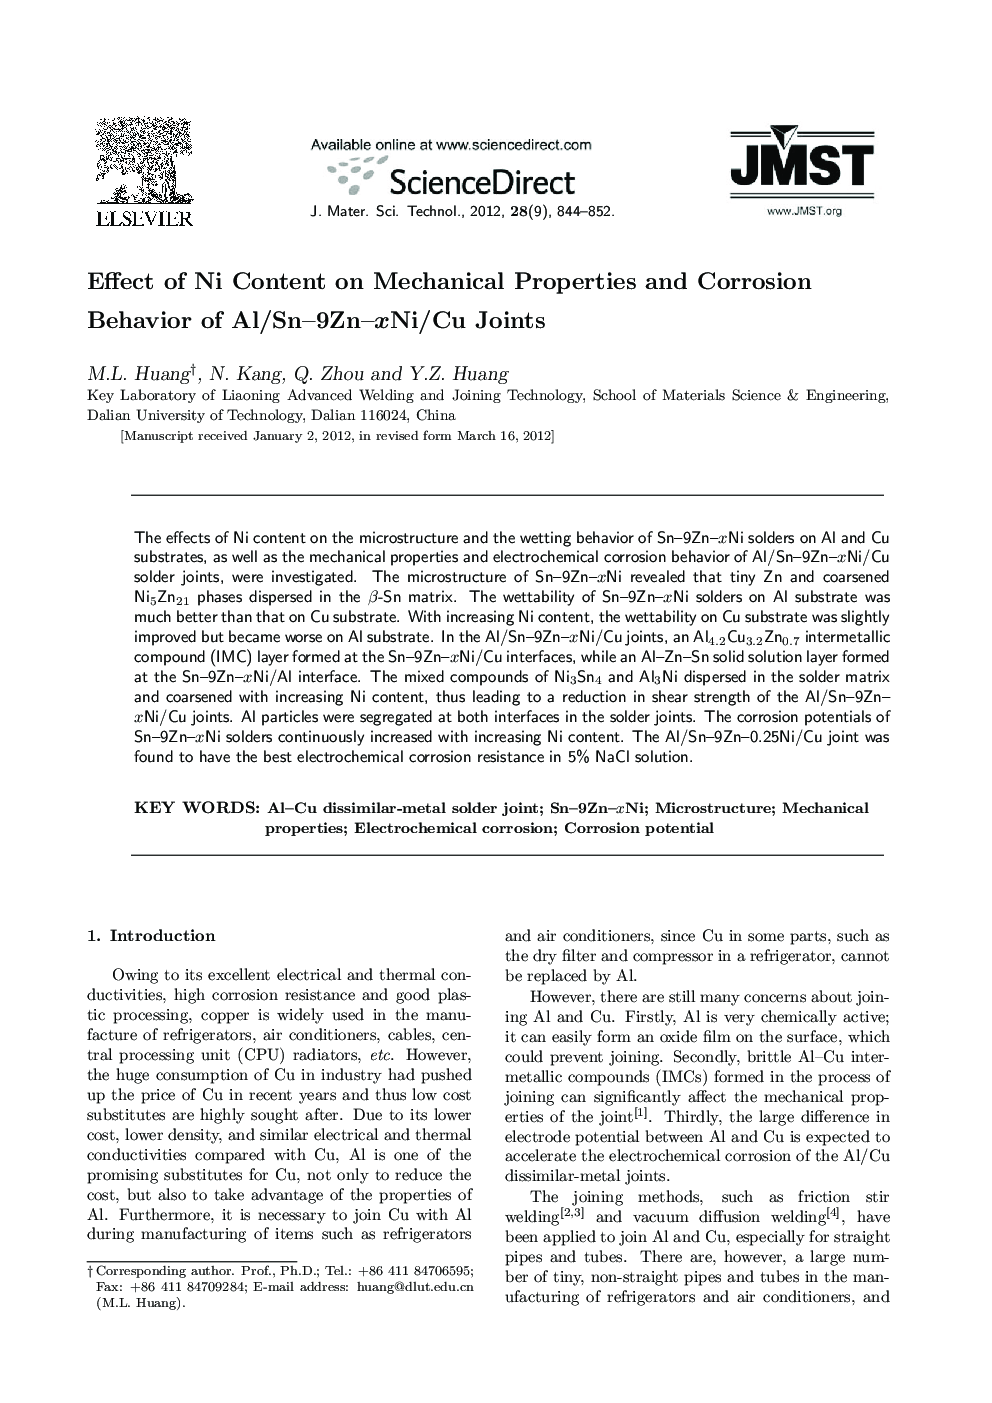 Effect of Ni Content on Mechanical Properties and Corrosion Behavior of Al/Sn-9Zn-xNi/Cu Joints